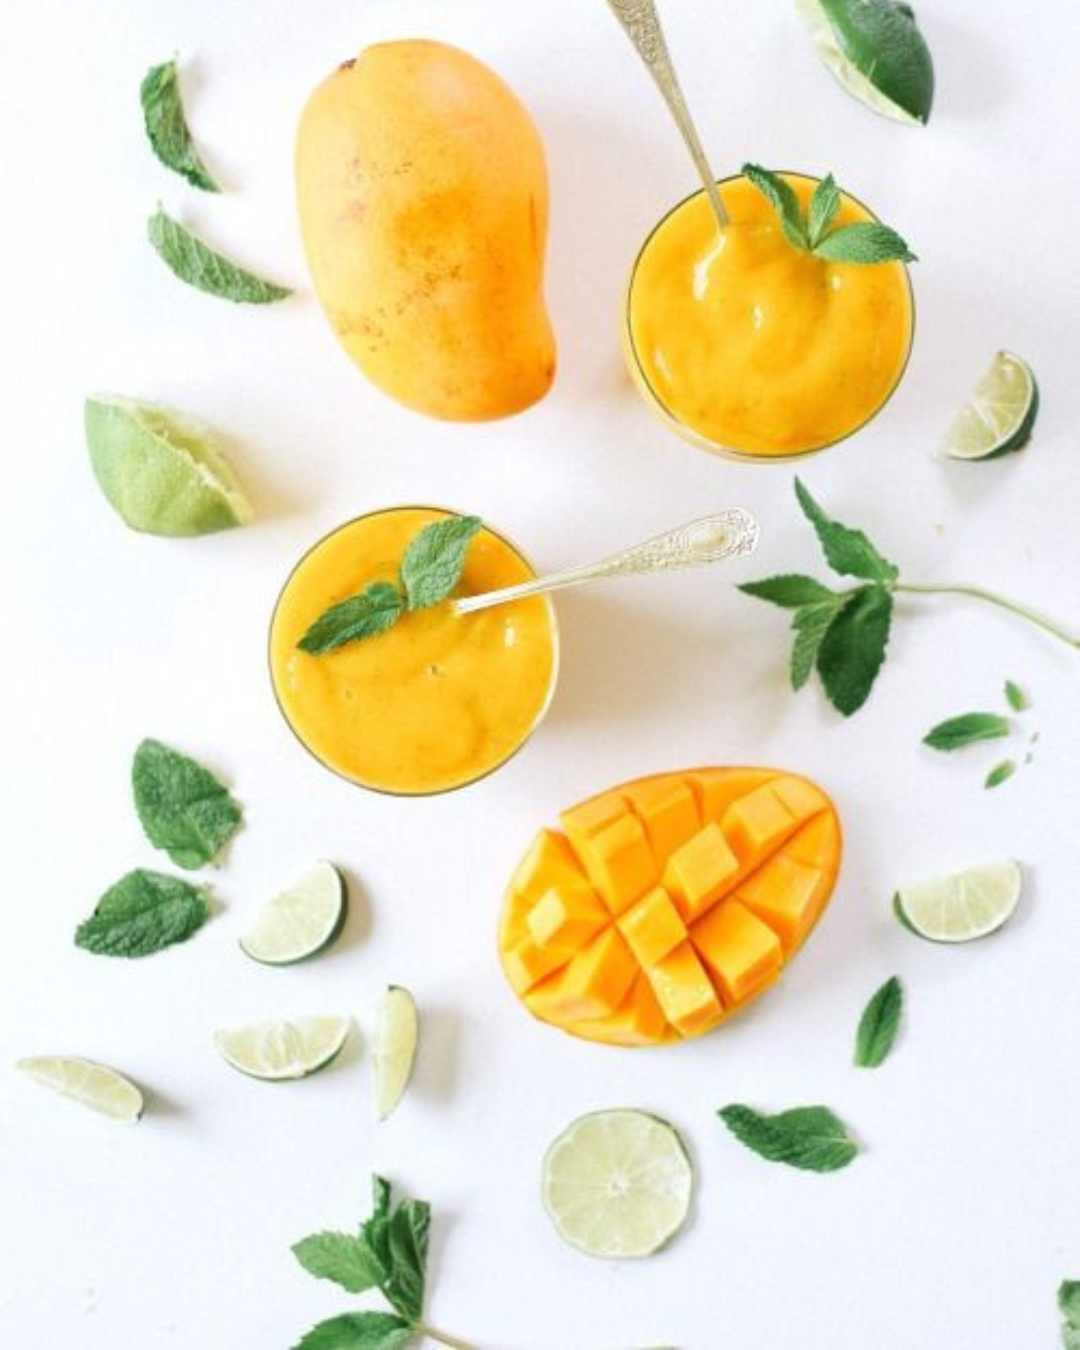 6 Honey + Mango Recipes to Make Your Mouth Water